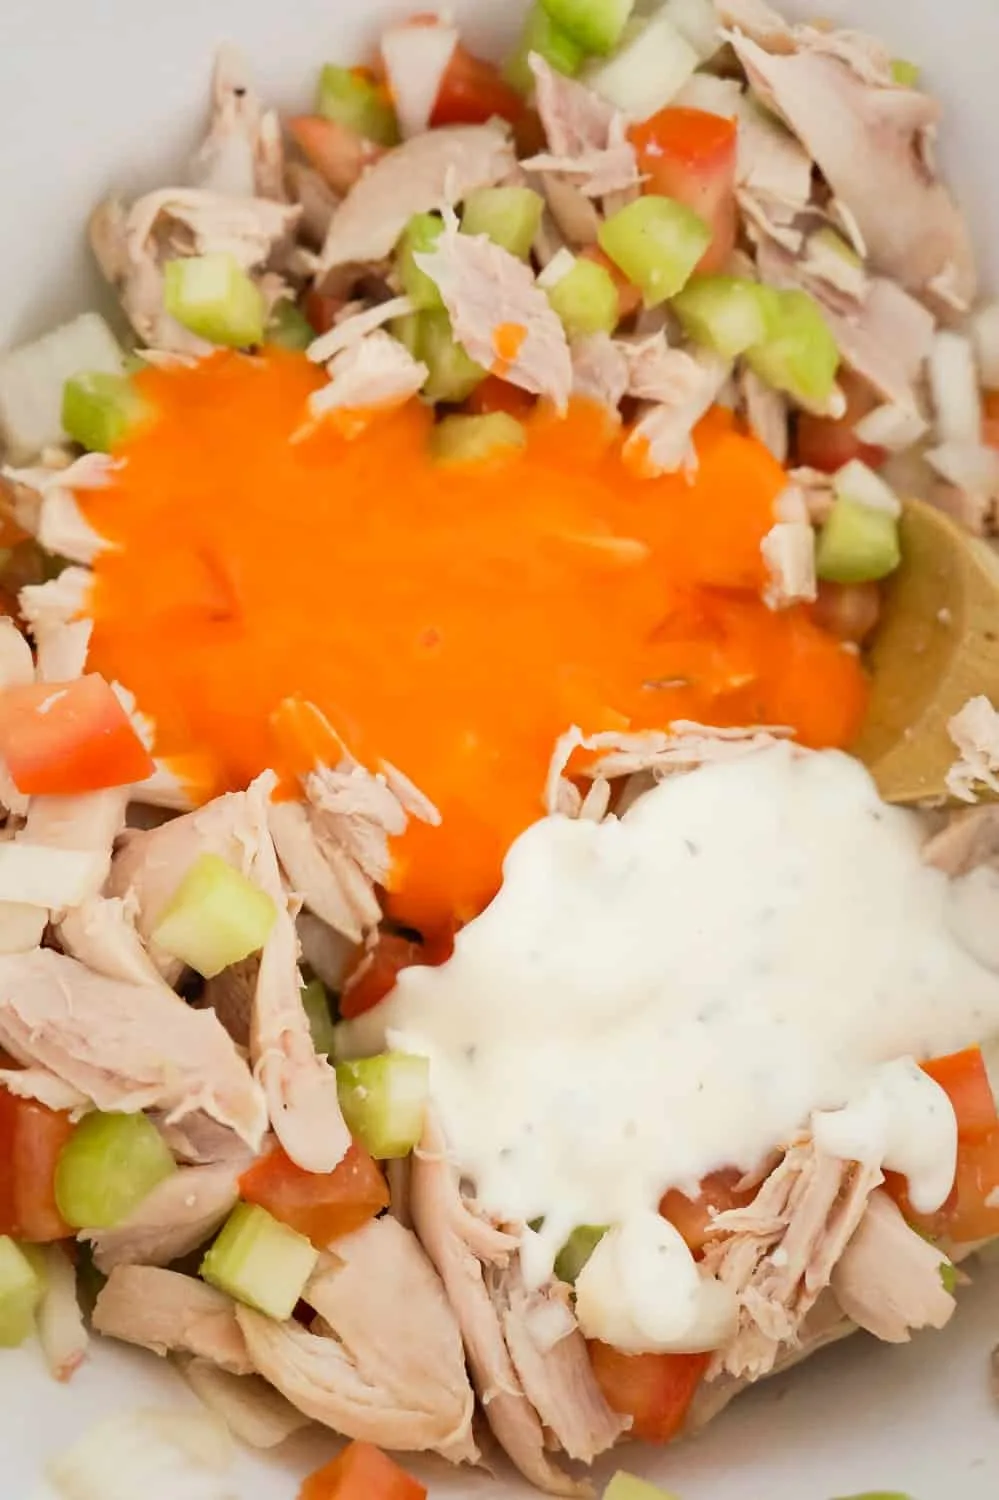 buffalo sauce and ranch dressing on top of shredded chicken and diced vegetables in a mixing bowl